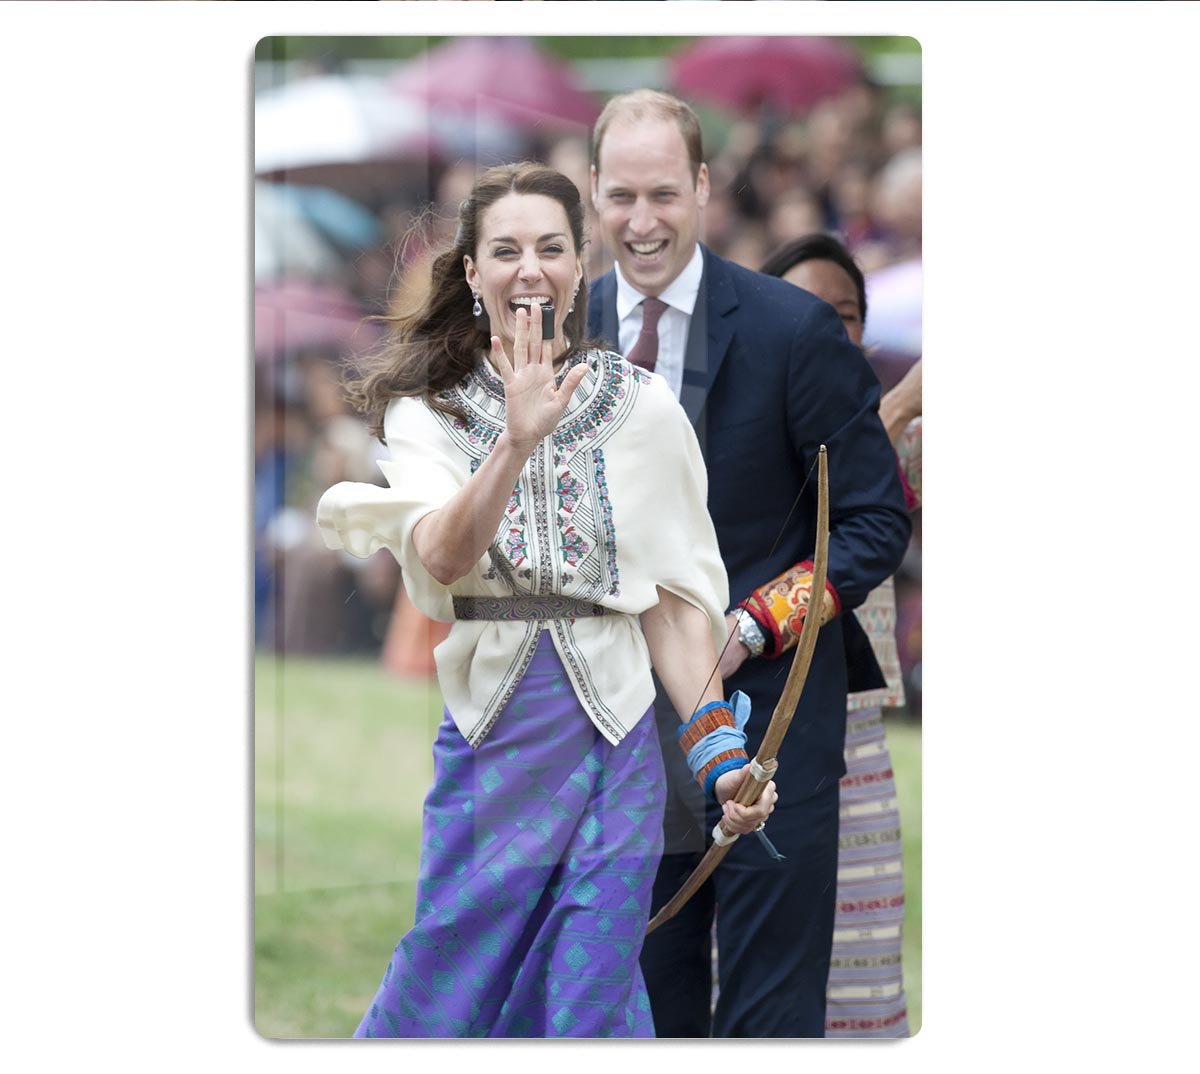 Prince William and Kate laughing trying archery in Bhutan HD Metal Print